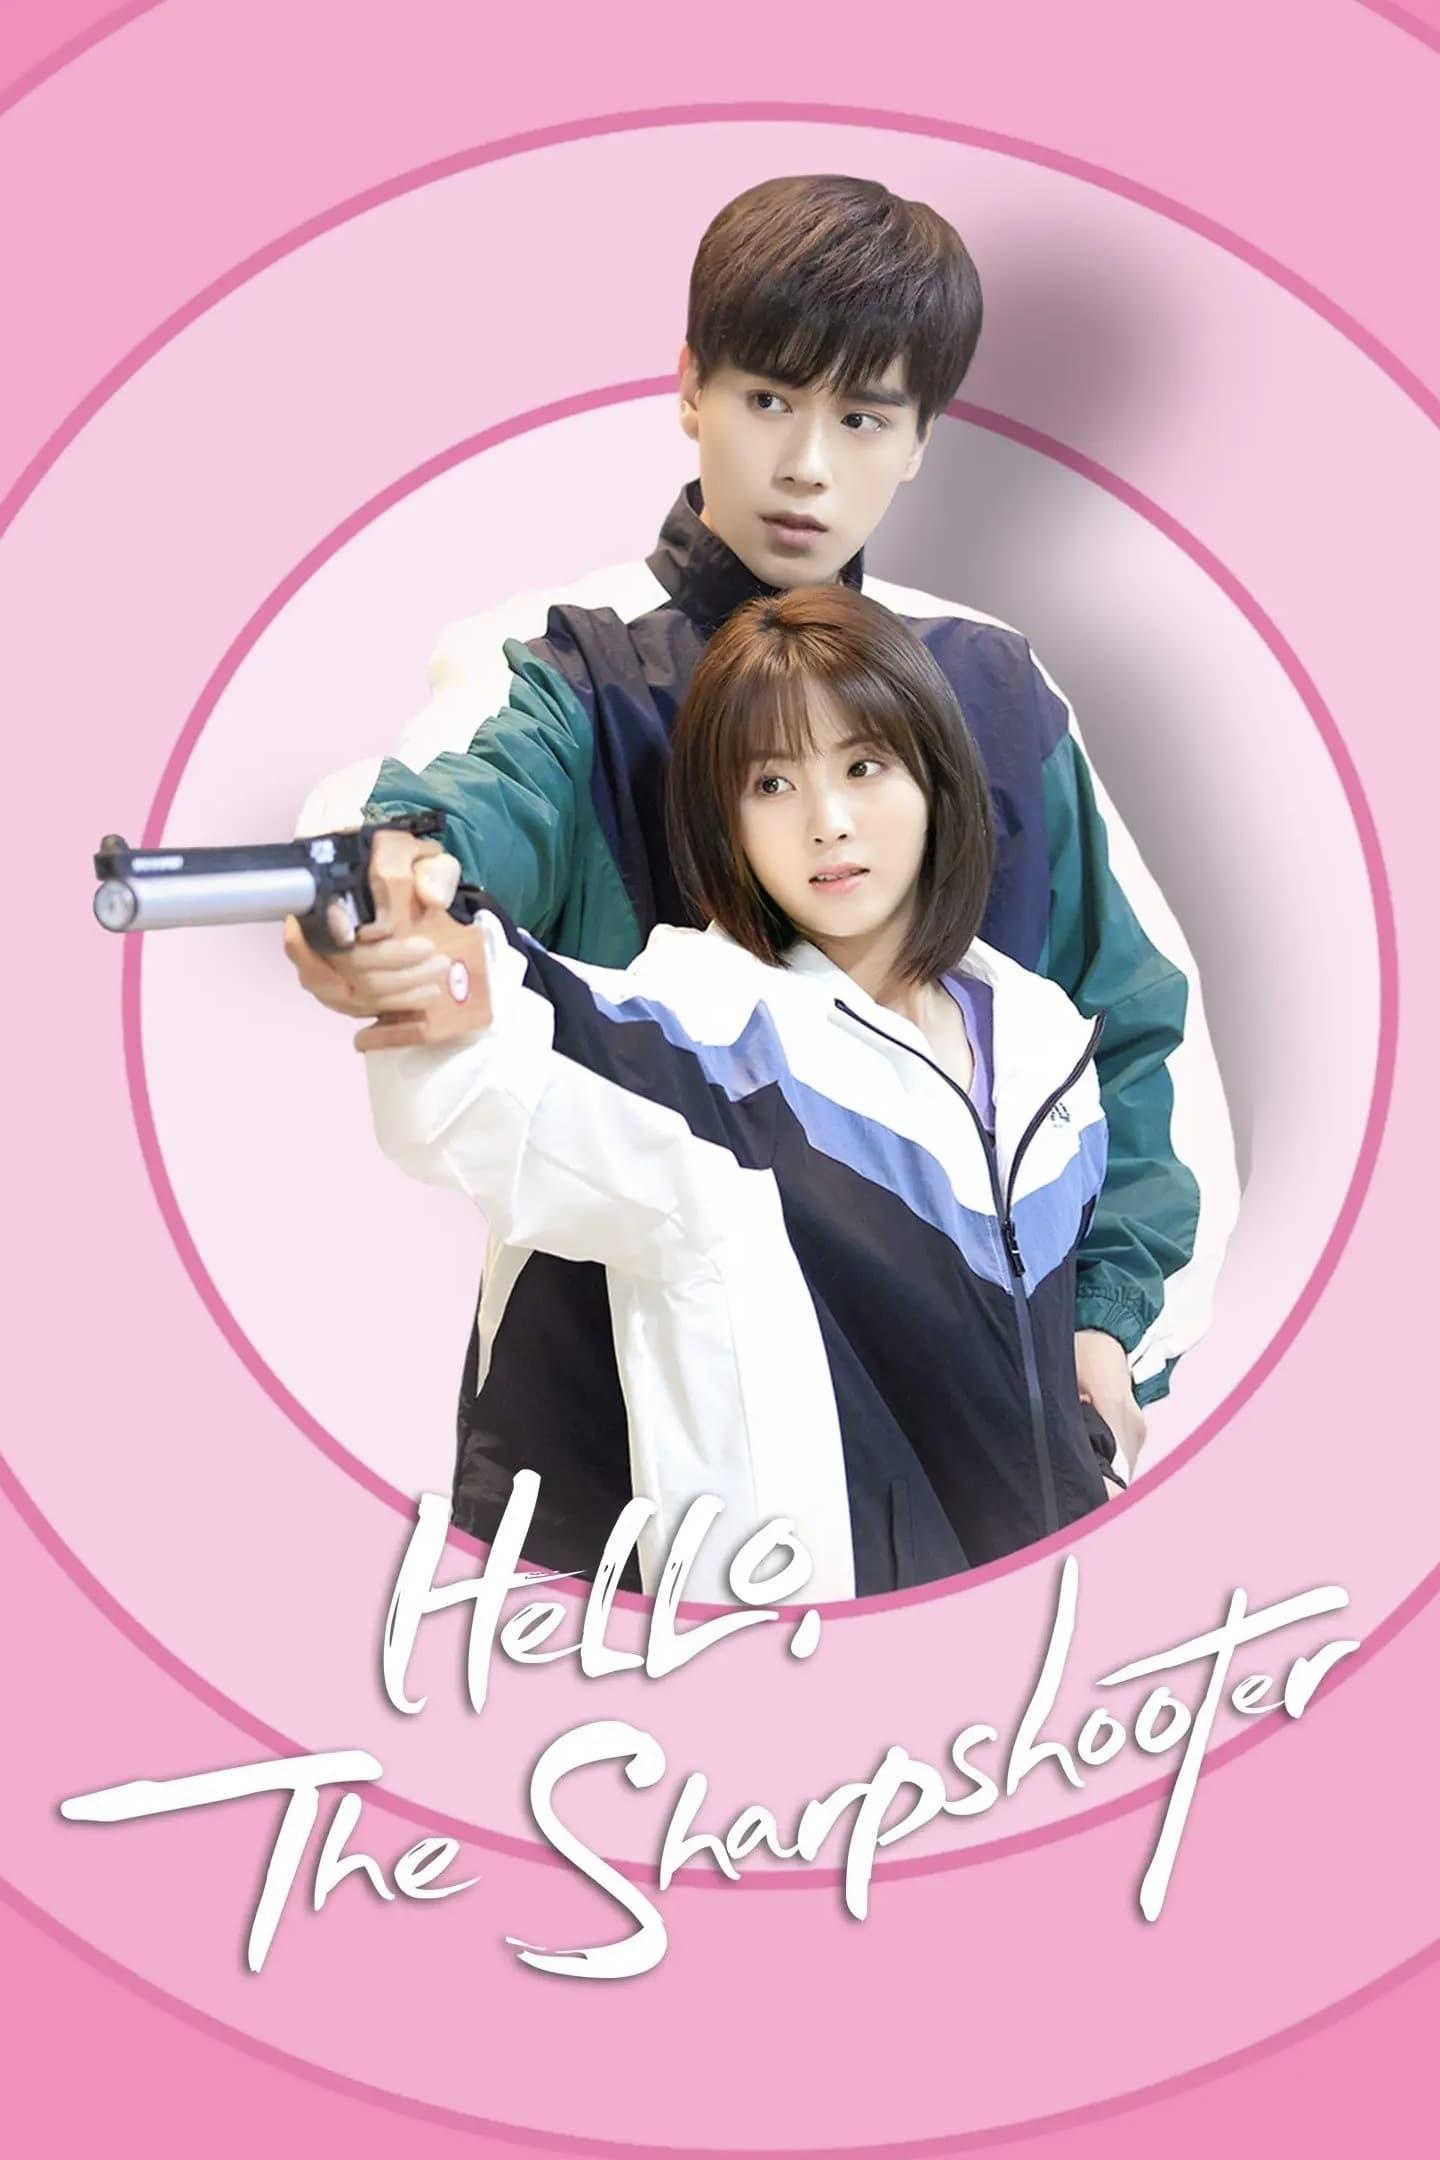 Hello, The Sharpshooter poster